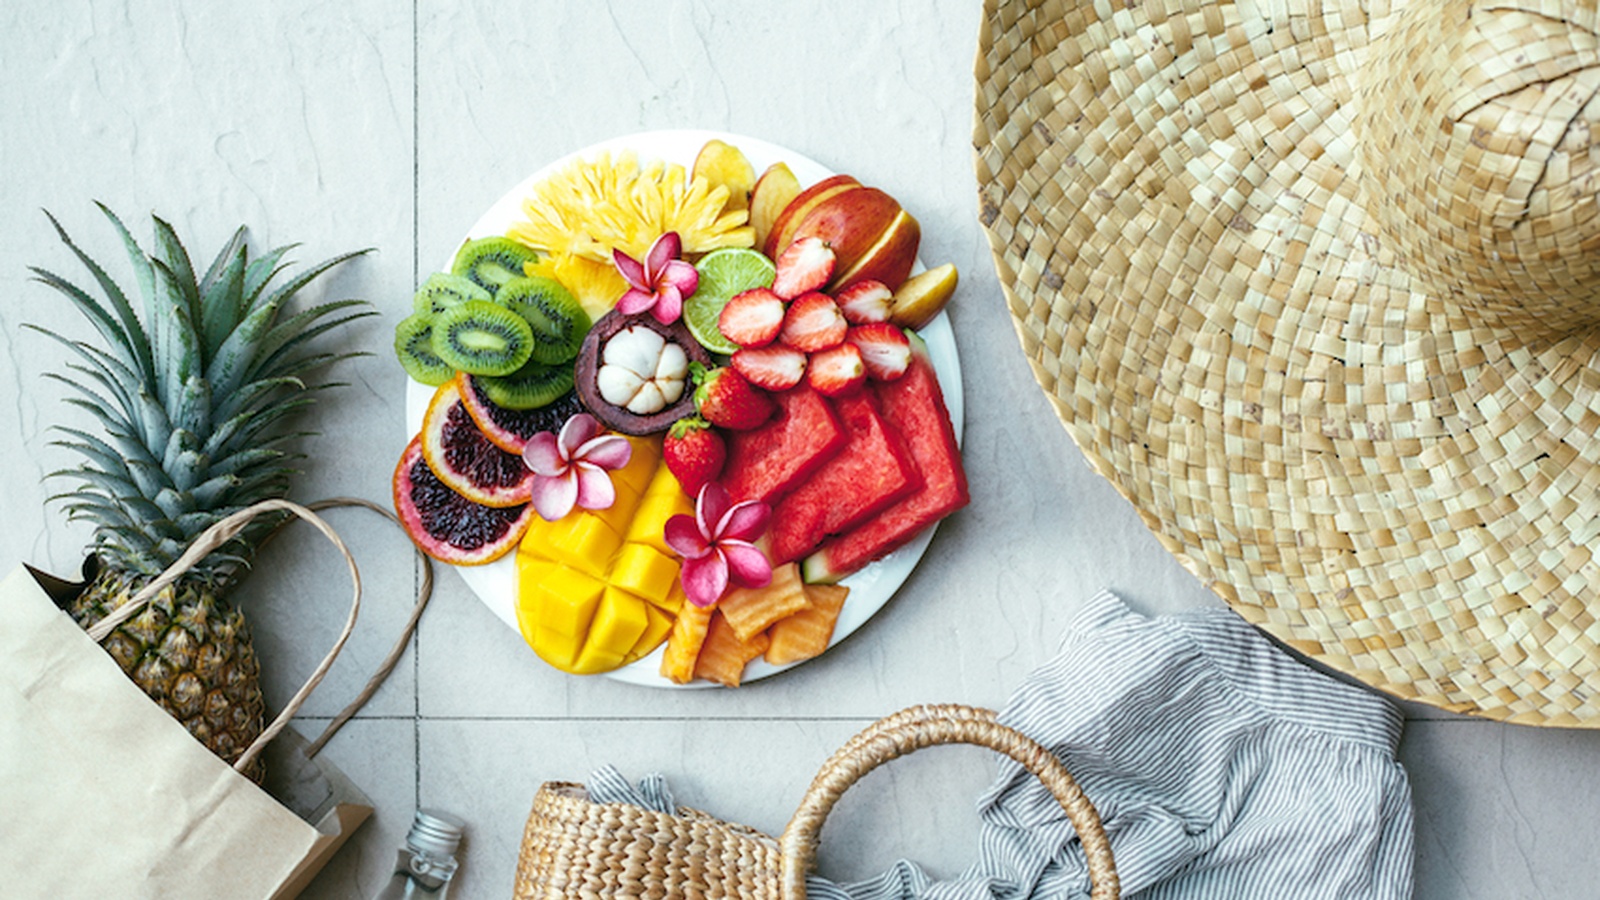 How To Stay Healthy While Traveling | FOOD MATTERS®